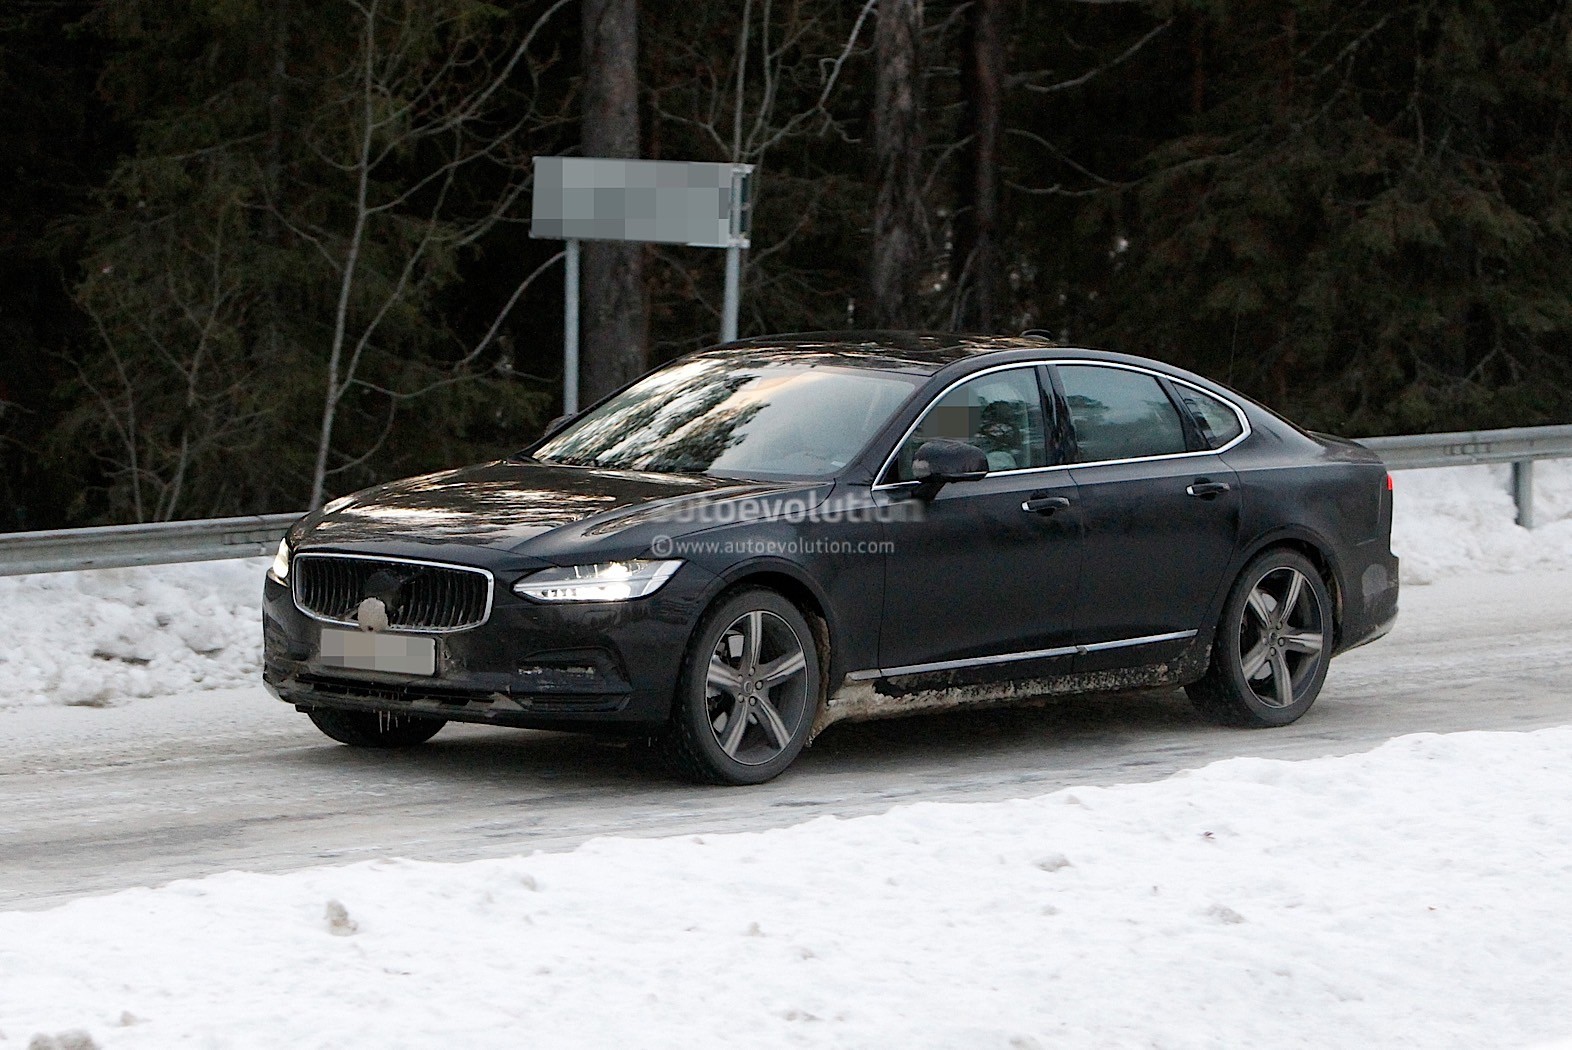 https://s1.cdn.autoevolution.com/images/news/gallery/2021-volvo-s90-and-v90-facelift-wear-useless-camouflage-winter-testing_13.jpg